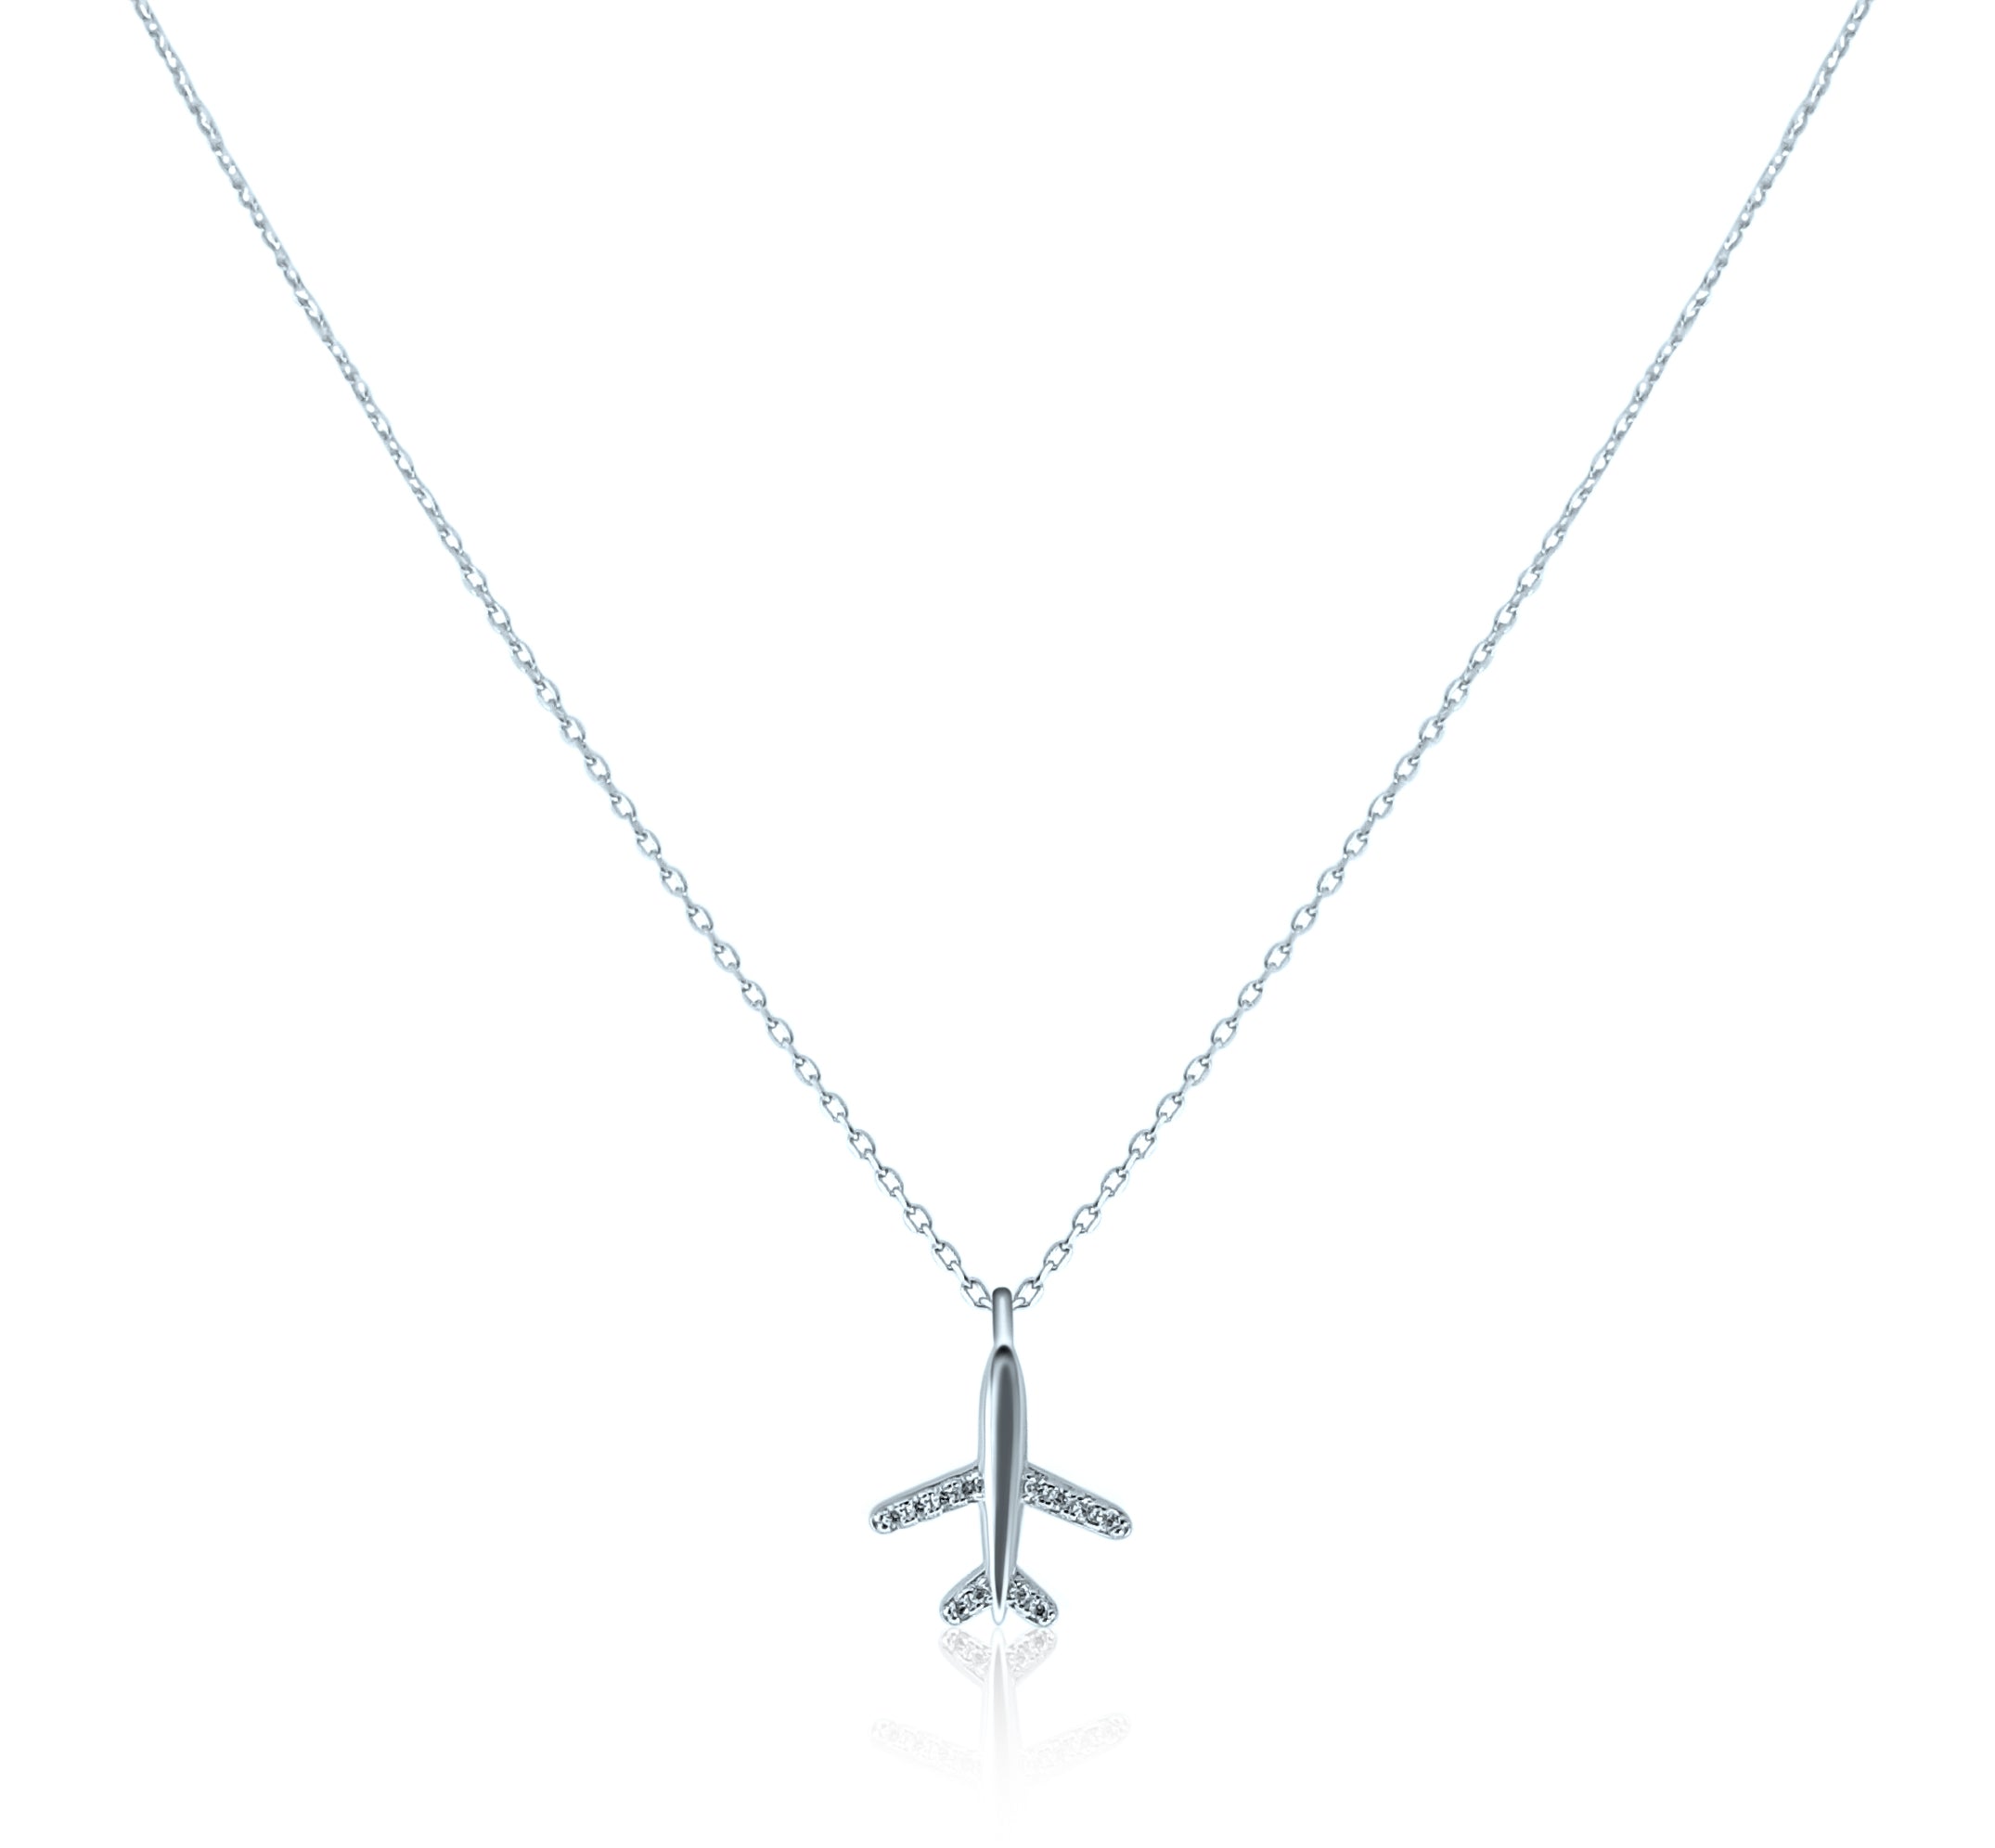 Aviation Necklace Silver Airplane with engines